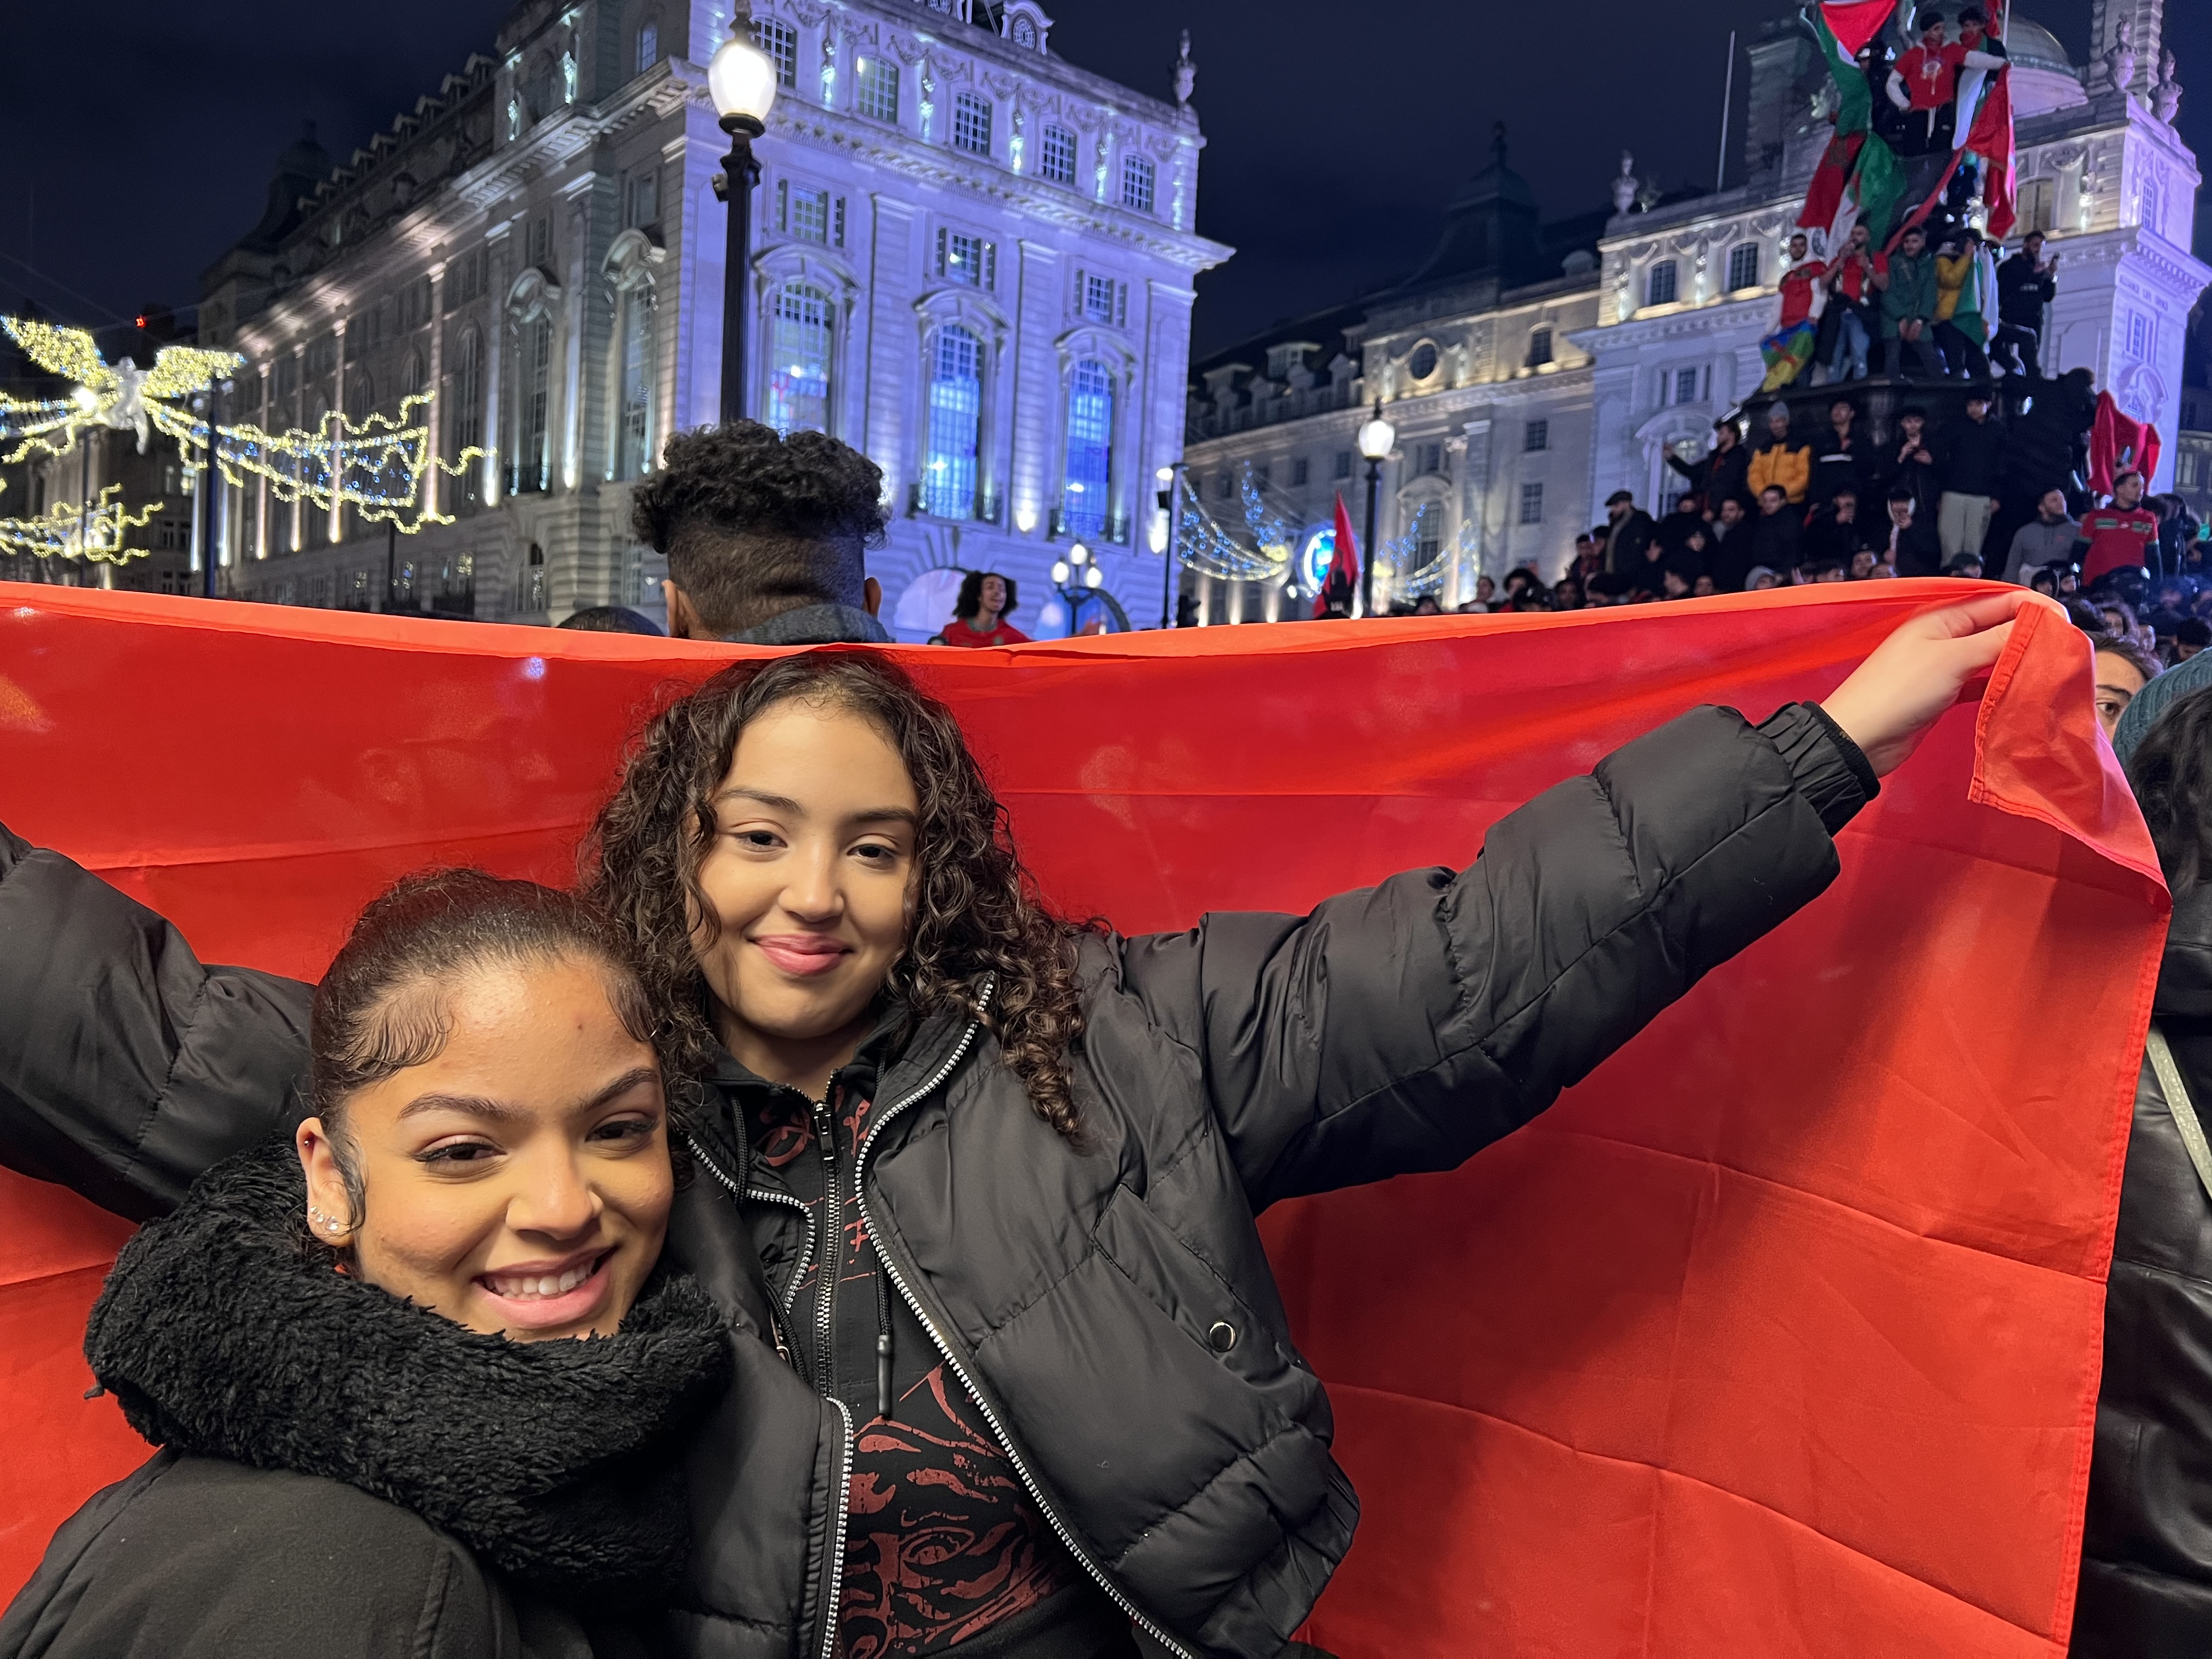 Imane Ali and her sister Franscesca came to celebrate with her fellow Moroccans in Piccadily Circus (MEE/Areeb Ullah)